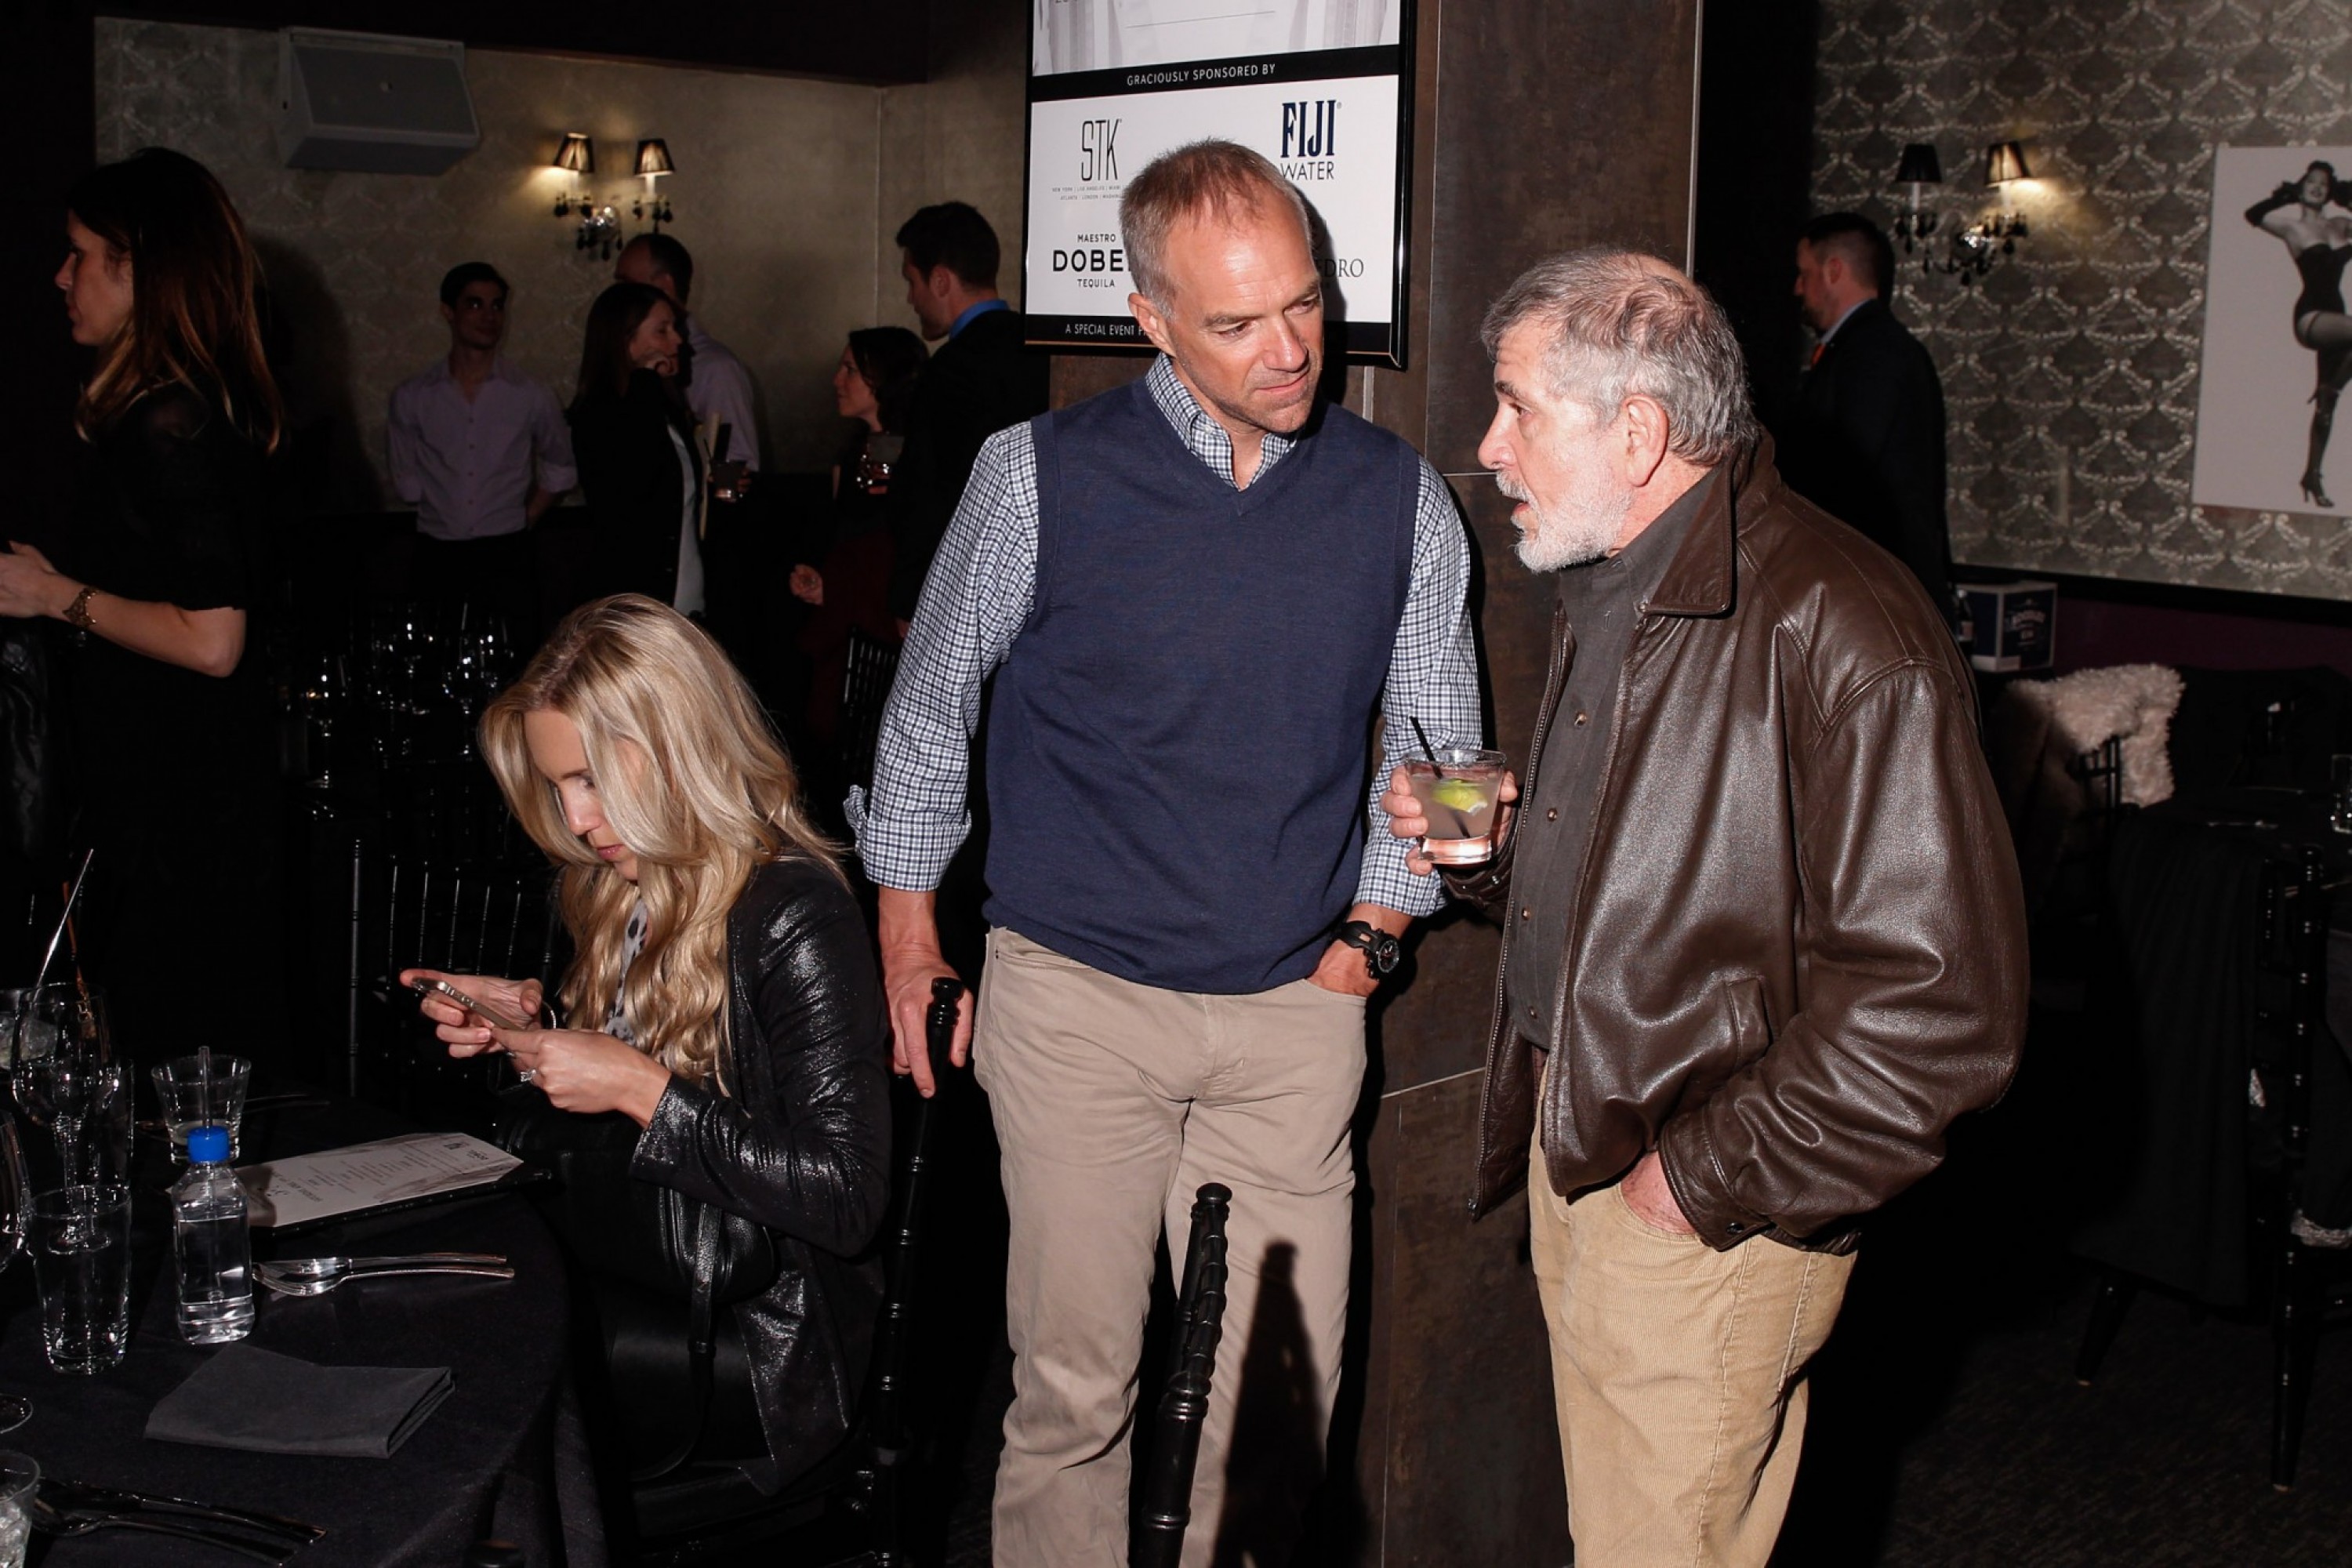 5 to 7 Cast Dinner At Supper Suite By STK Hosted With Fiji Water And Dobel Tequila. Photos by Thomas Concordia/WireImage Screening Times: SAT 4/19 6:30 PM SVA Theater 1 Silas MON 4/21 4:00 PM AMC Loews Village 7 &#8211; 2 THU 4/24 5:30 PM SVA Theater 2 Beatrice